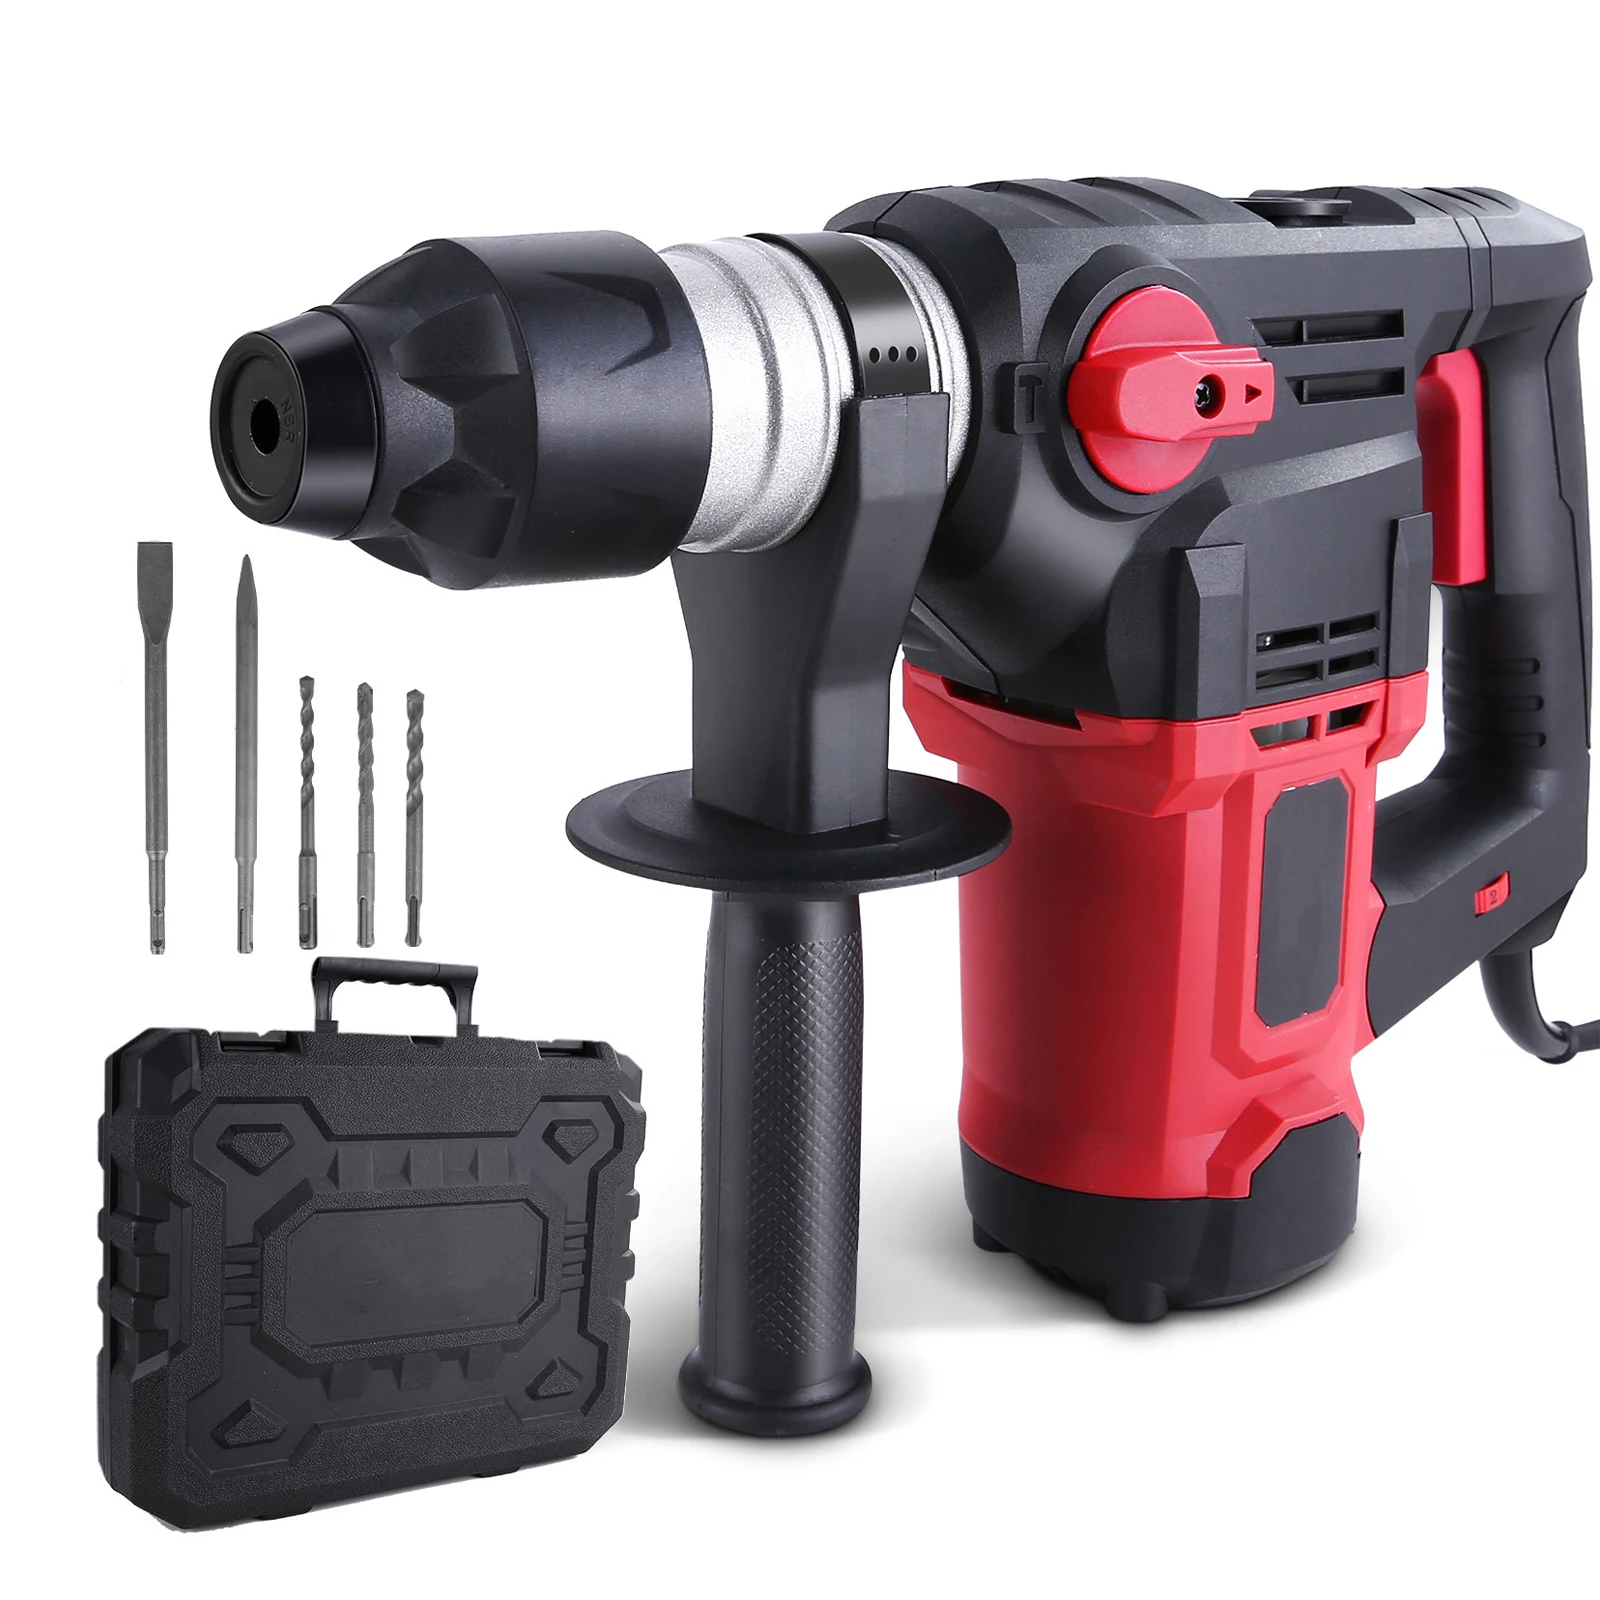 

Meterk 1500W 880rpm Multi-function Electric Hammer Impact Drill Electric Hammers Power Drills With BMC And 5pcs Accessories New